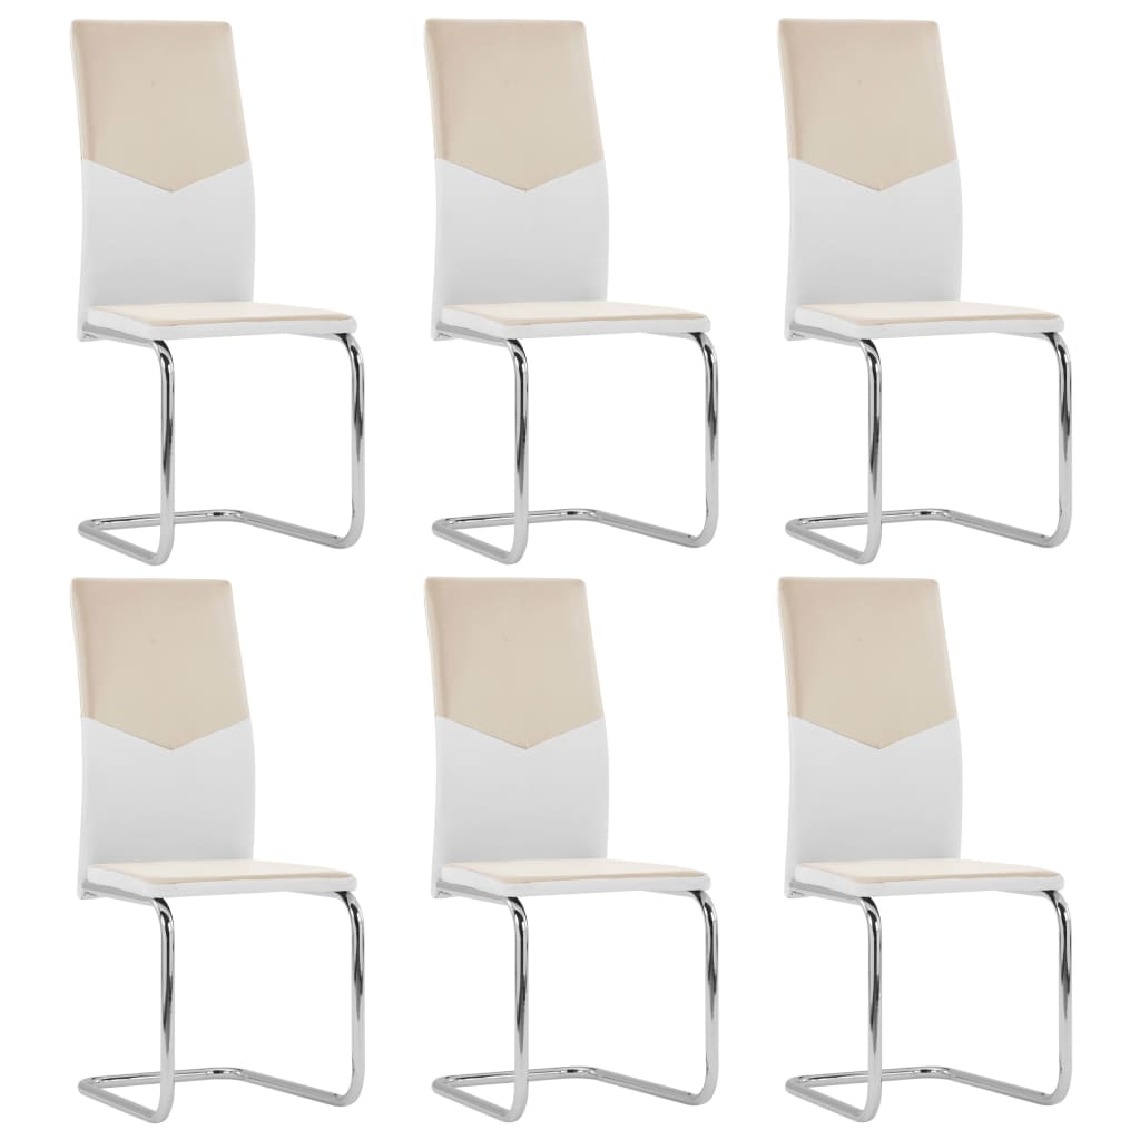 Chunhelife - Chunhelife Chaises de salle à manger cantilever 6pcs Cappuccino Similicuir - Chaises